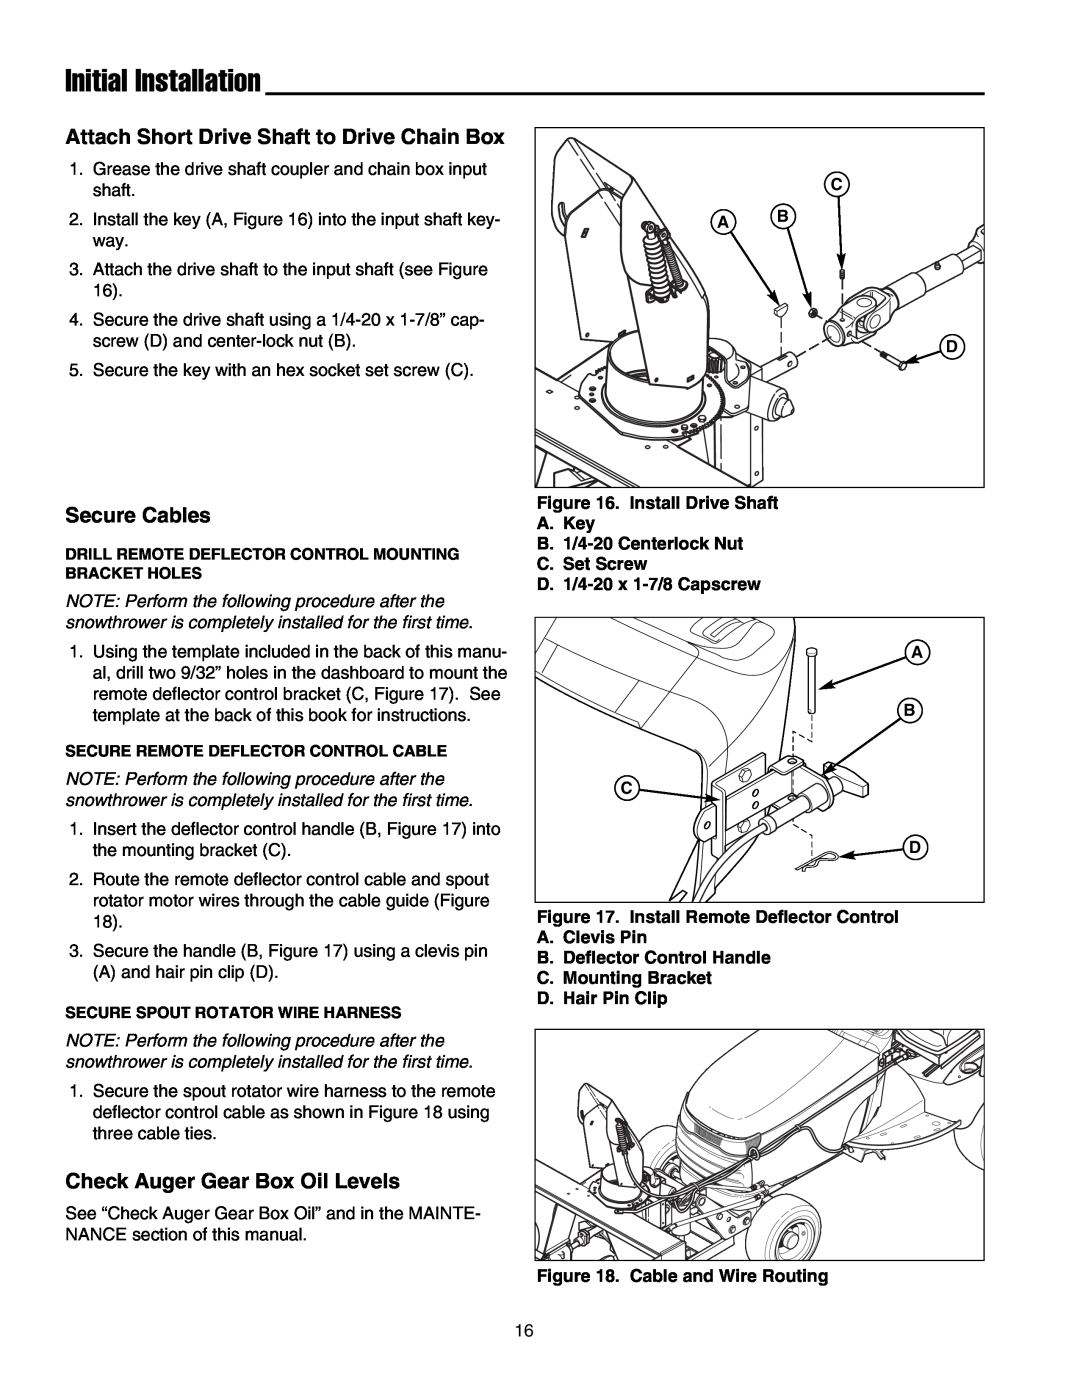 Simplicity 1694404 manual Attach Short Drive Shaft to Drive Chain Box, Secure Cables, Check Auger Gear Box Oil Levels 